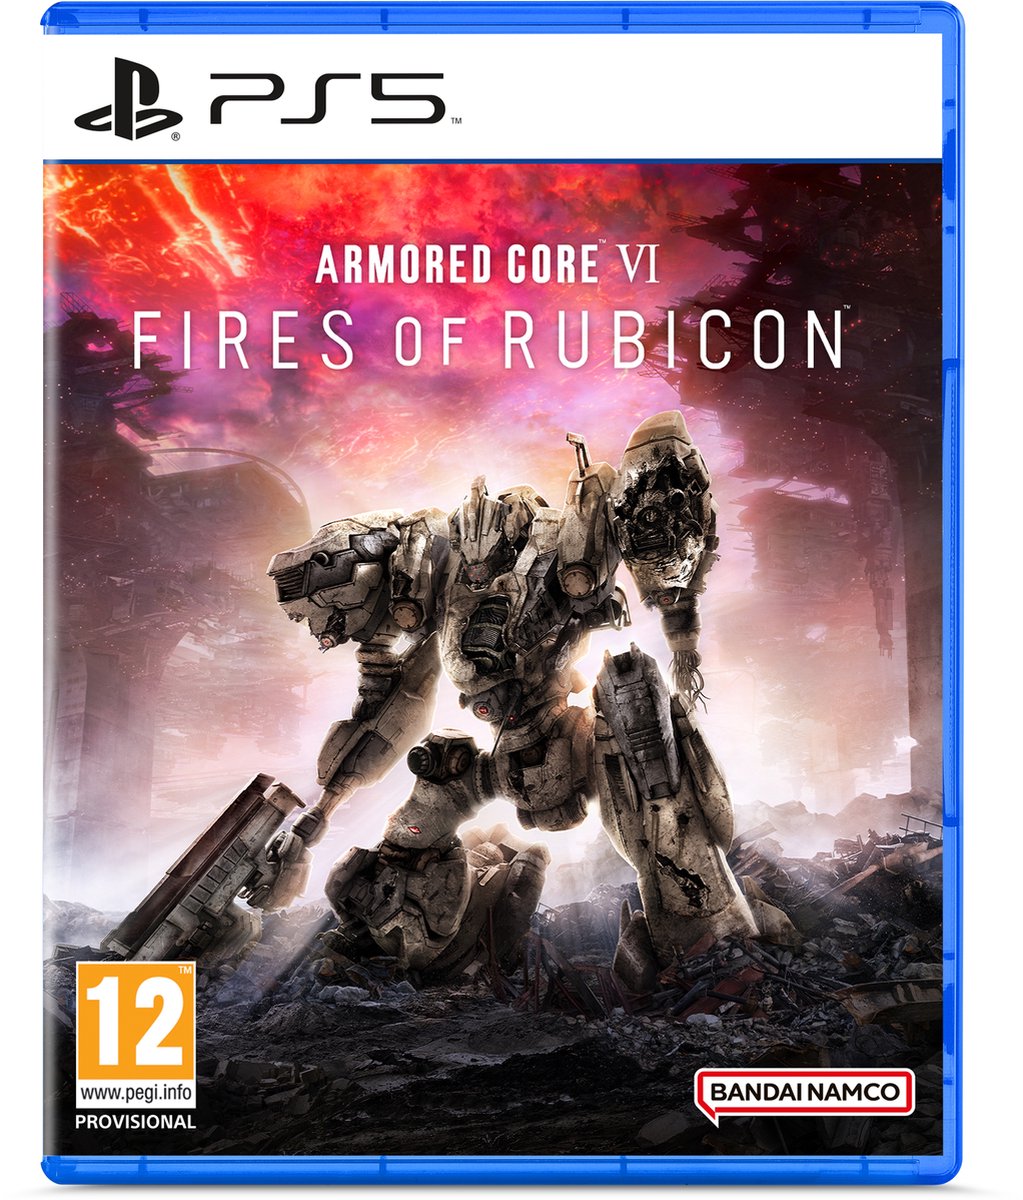 Armored Core VI: Fires of Rubicon - Launch Edition (PS5), FromSoftware, Inc.